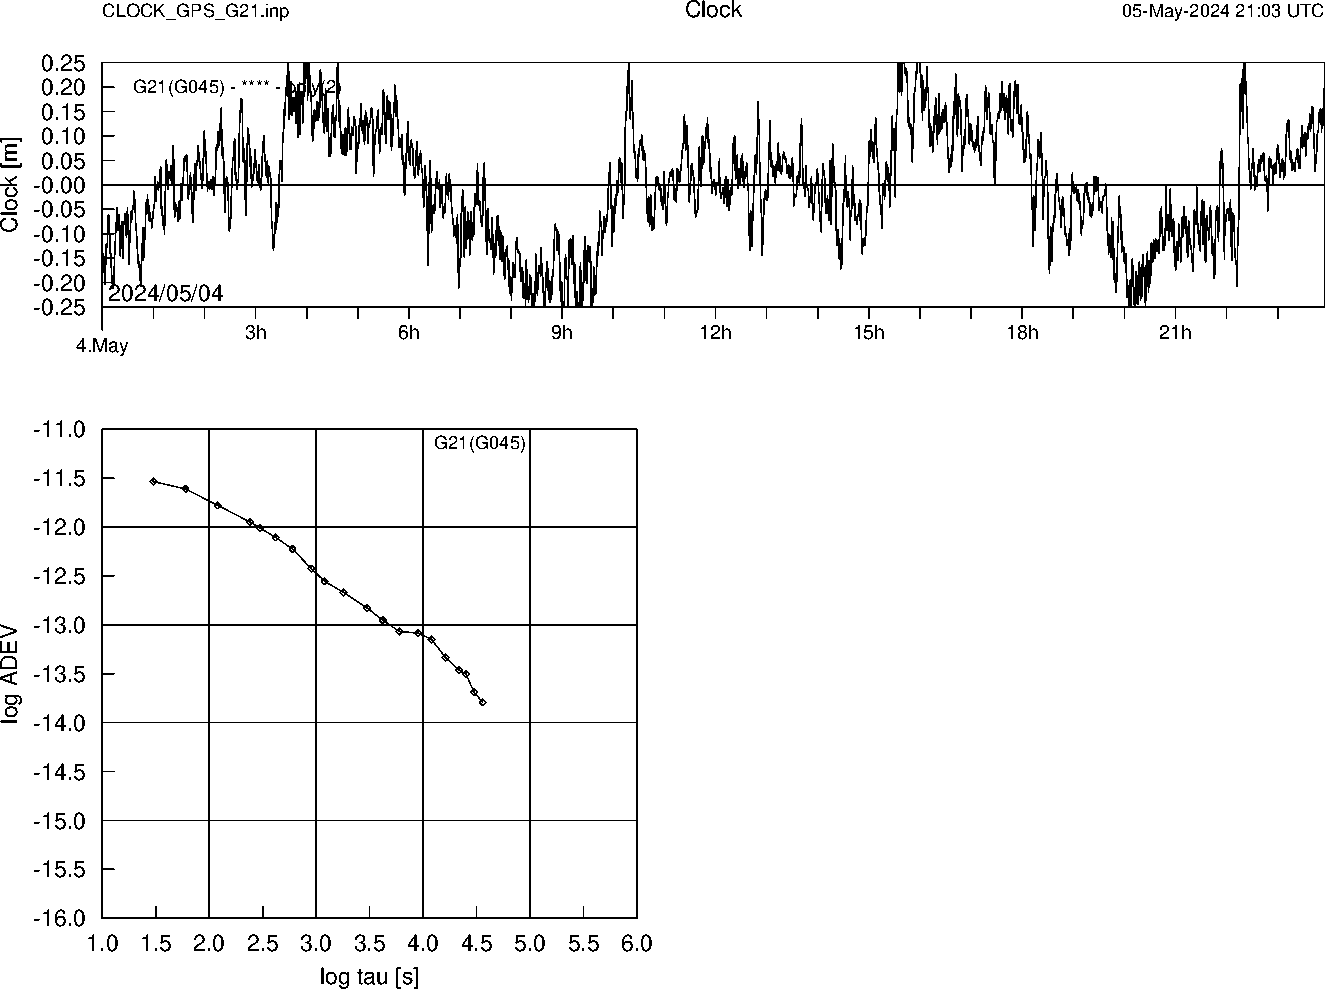 GPS G21 Clock Time Series and Allan Deviation